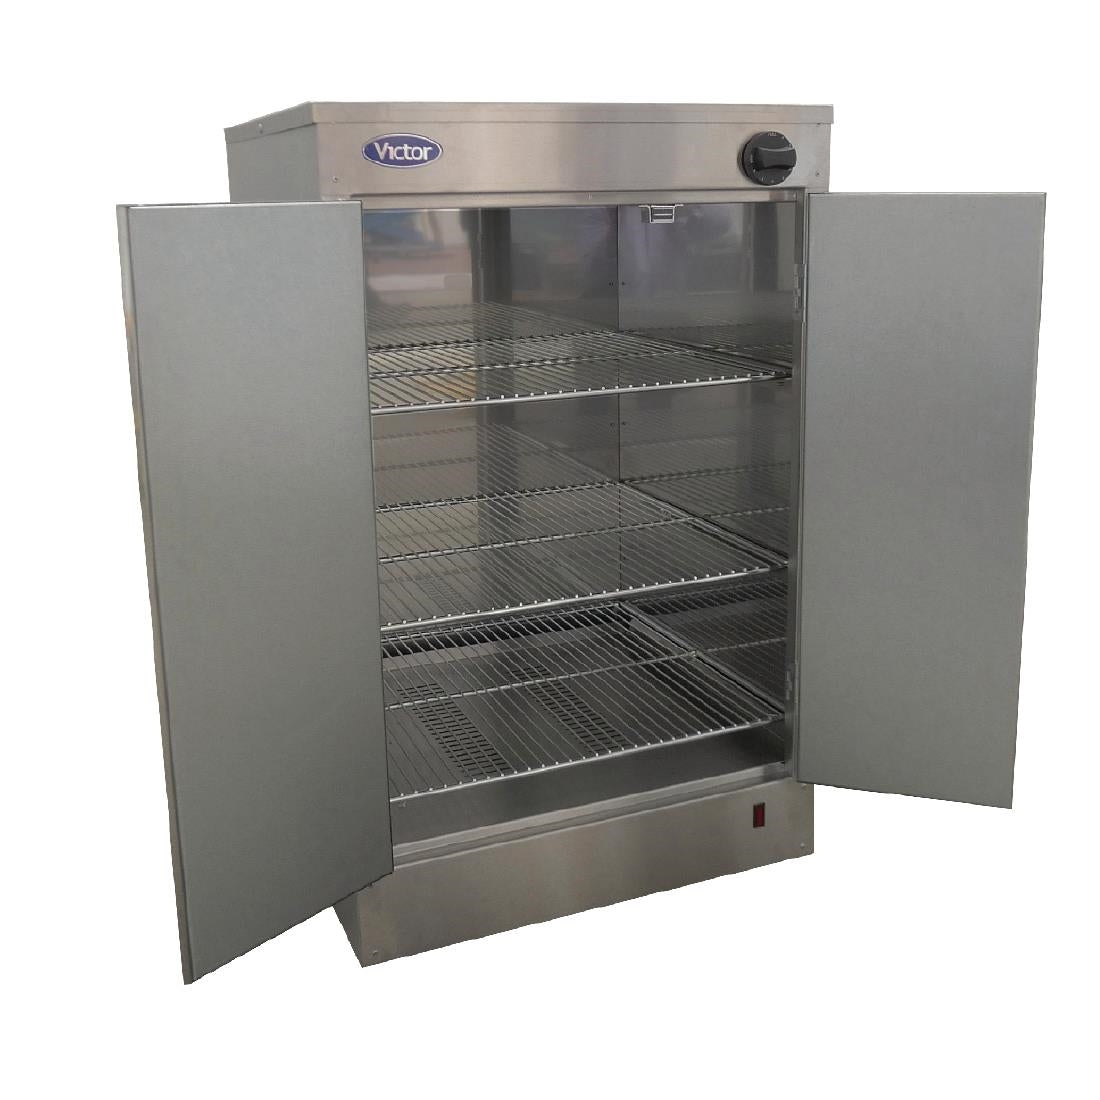 CE887 Victor Prince Hot Cupboard HED30100